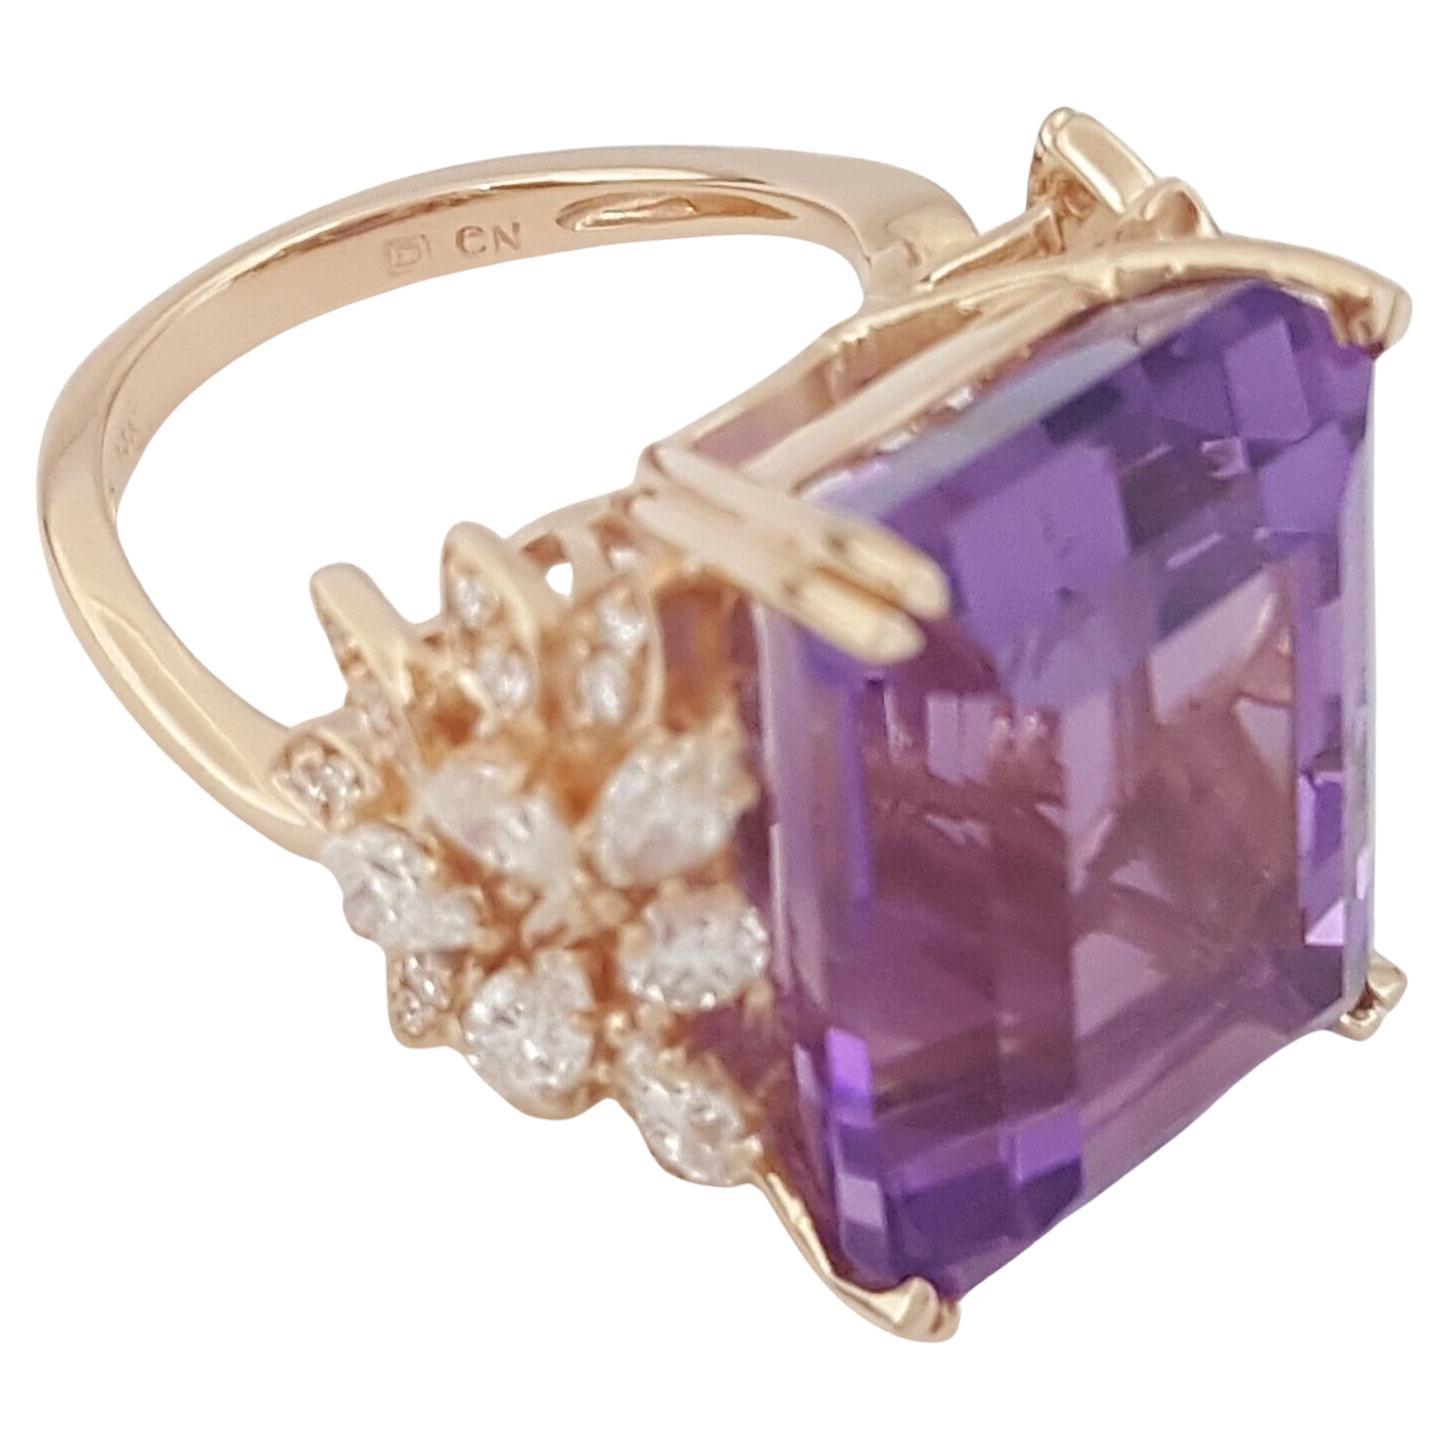 Indulge in luxury with our breathtaking statement ring featuring a stunning 25.85 carat emerald-cut amethyst, adorned with a dazzling array of natural pear, round, and marquise brilliant-cut diamonds. Weighing 13.4 grams and sized perfectly at 7,